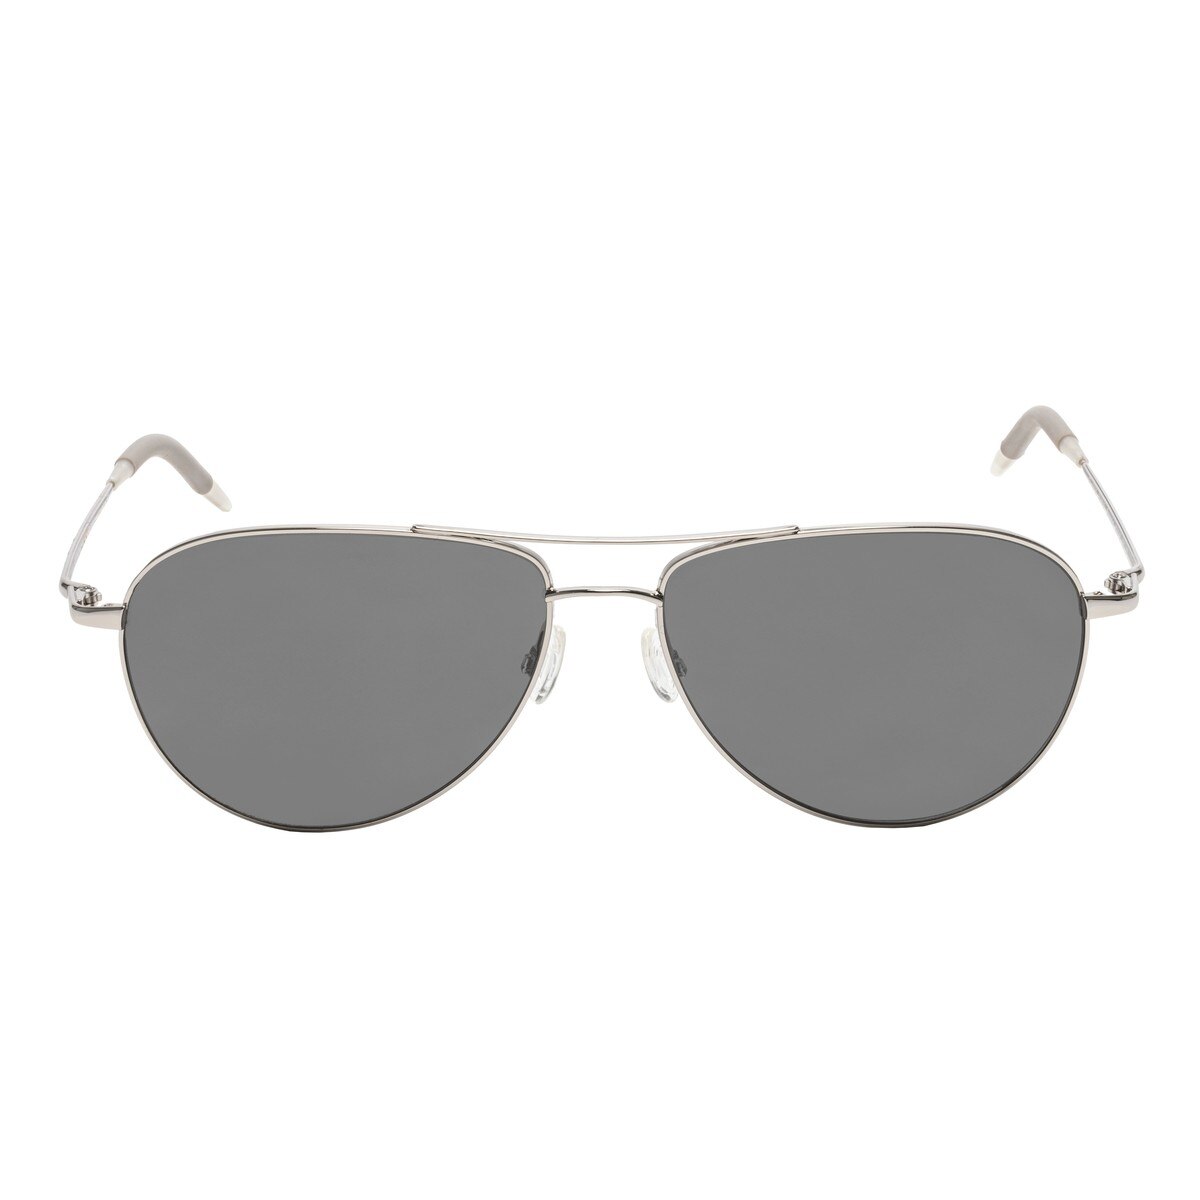 Oliver Peoples Costco Greece, SAVE 55% 